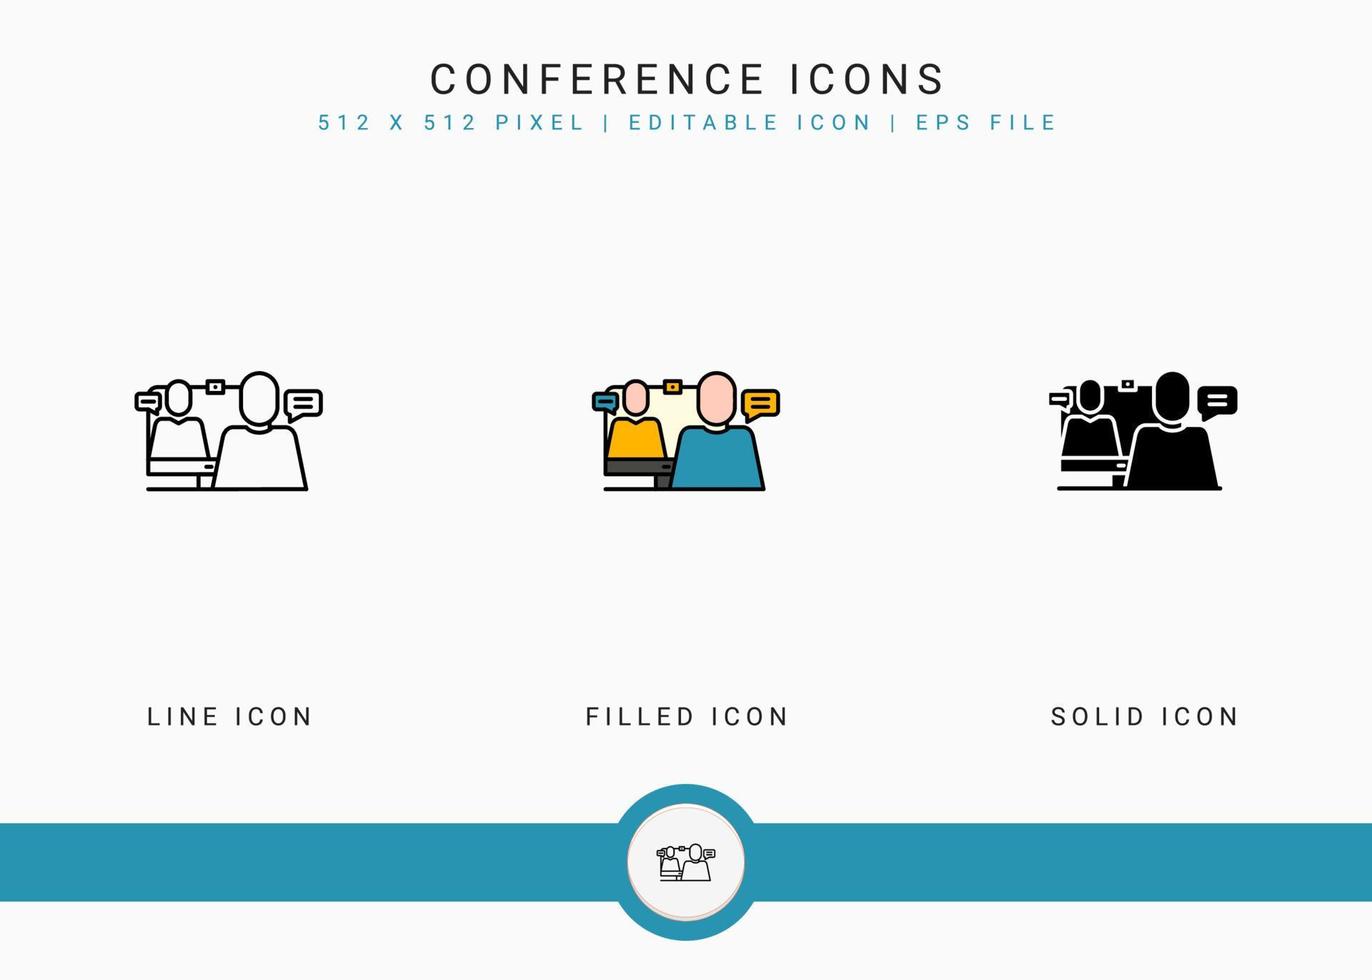 Conference icons set vector illustration with solid icon line style. Video call communication concept. Editable stroke icon on isolated background for web design, infographic and UI mobile app.